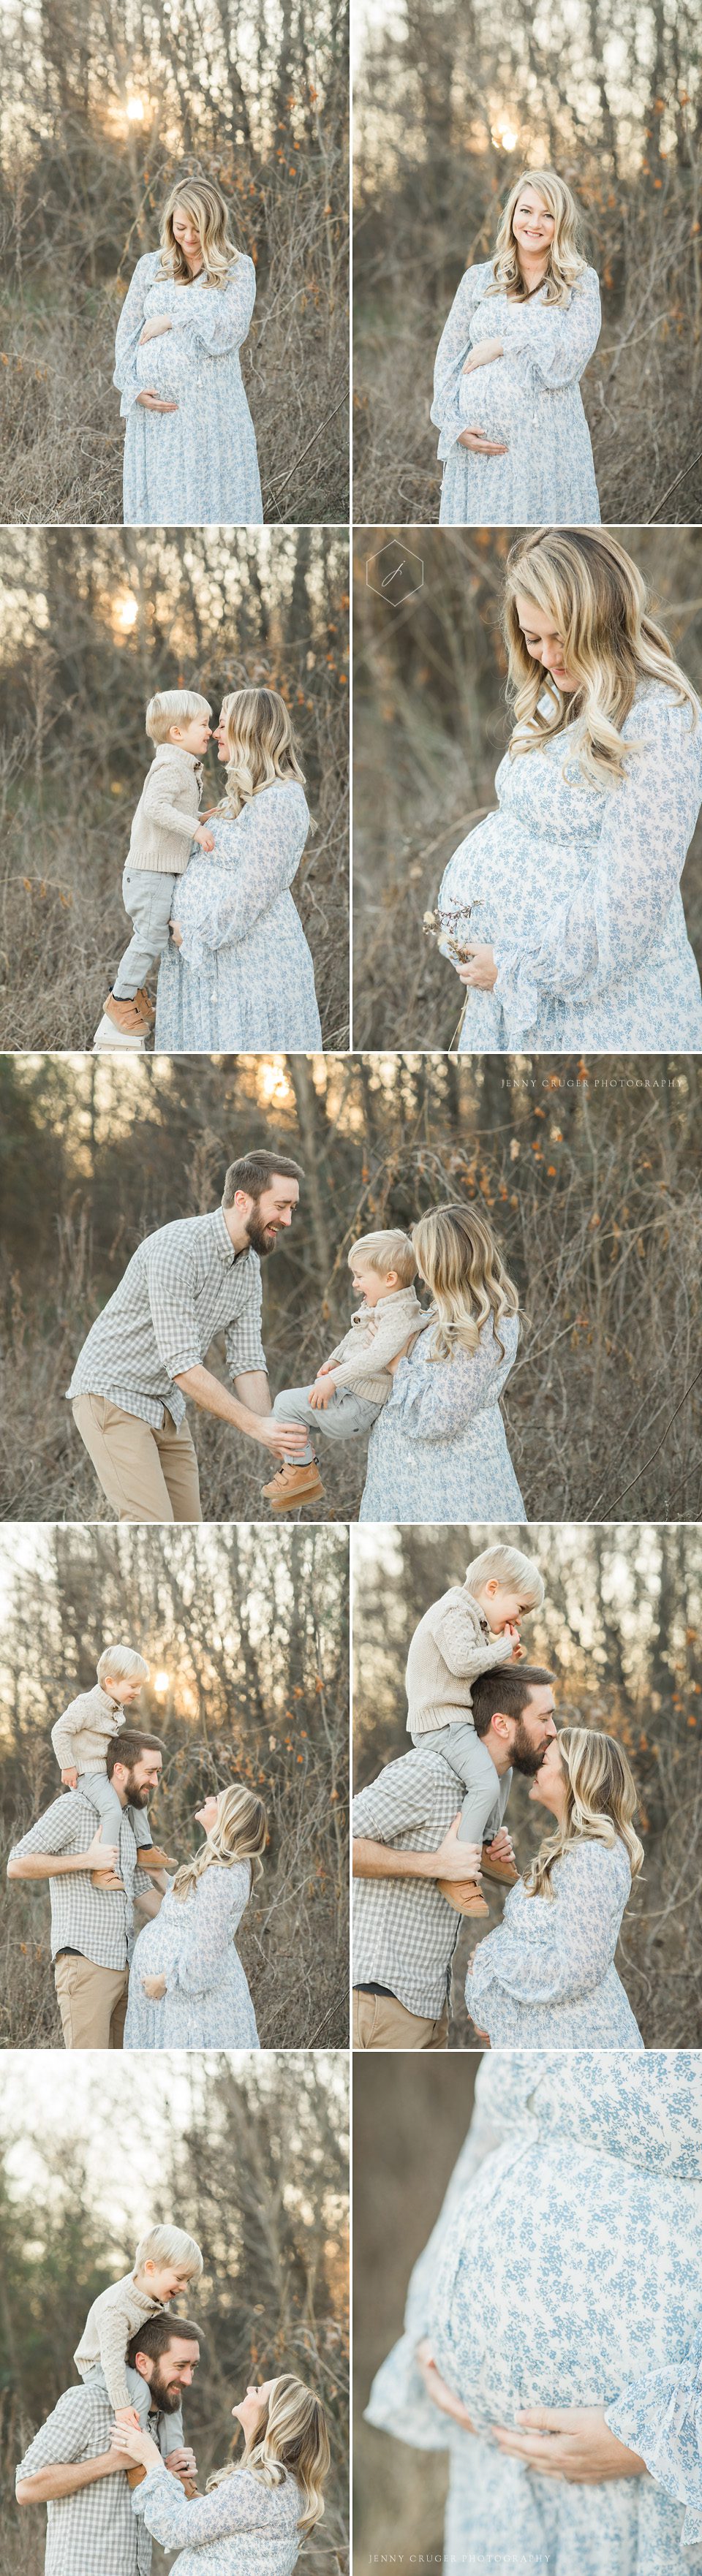 best outdoor family photography 